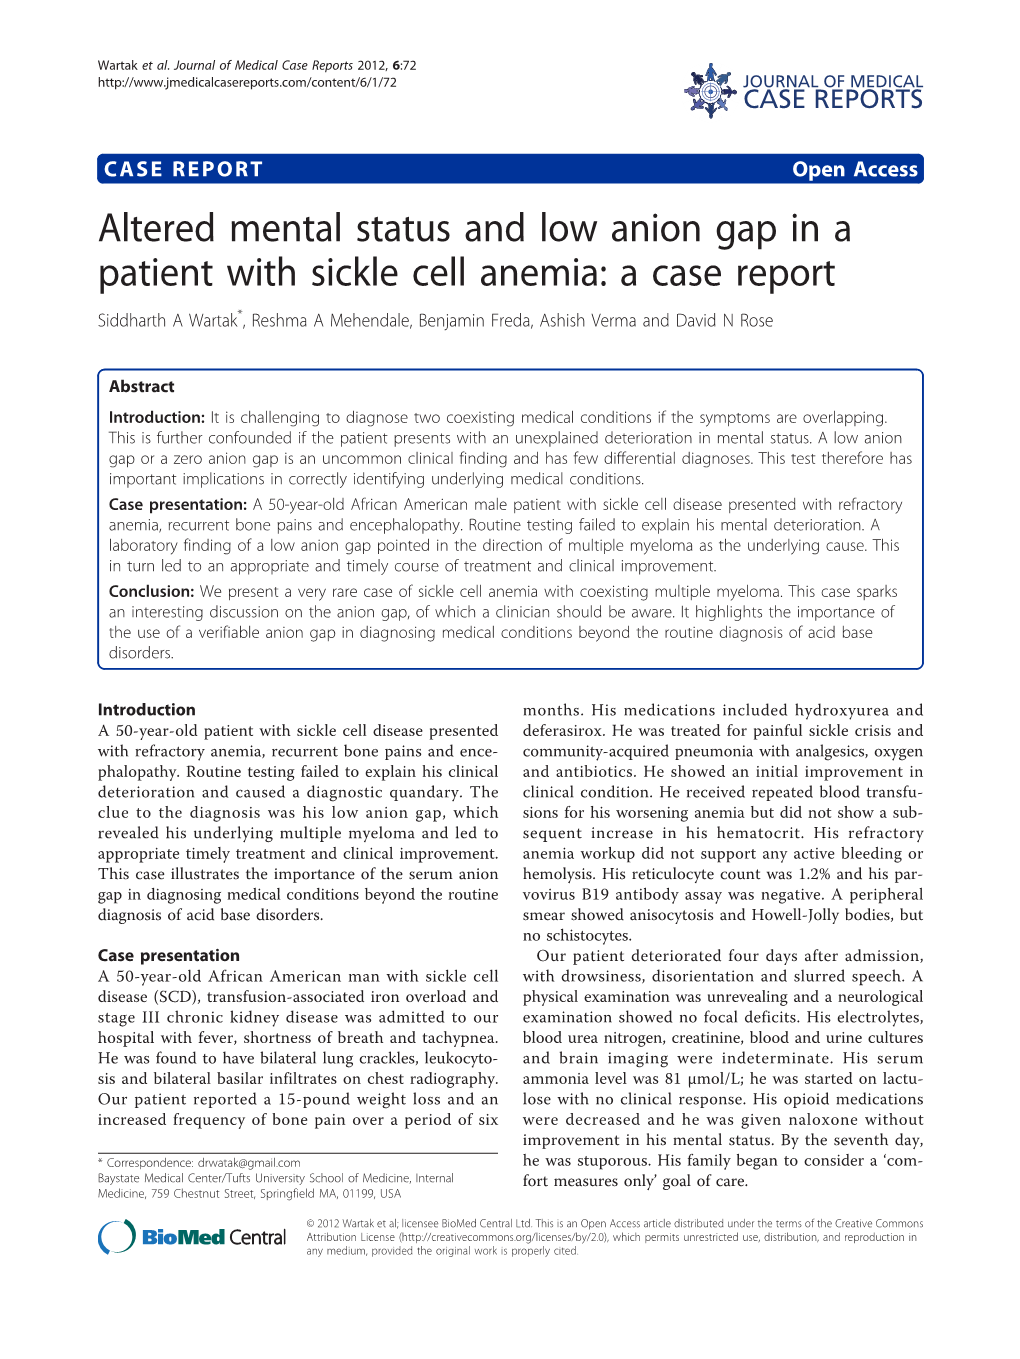 Altered Mental Status and Low Anion Gap in a Patient with Sickle Cell Anemia